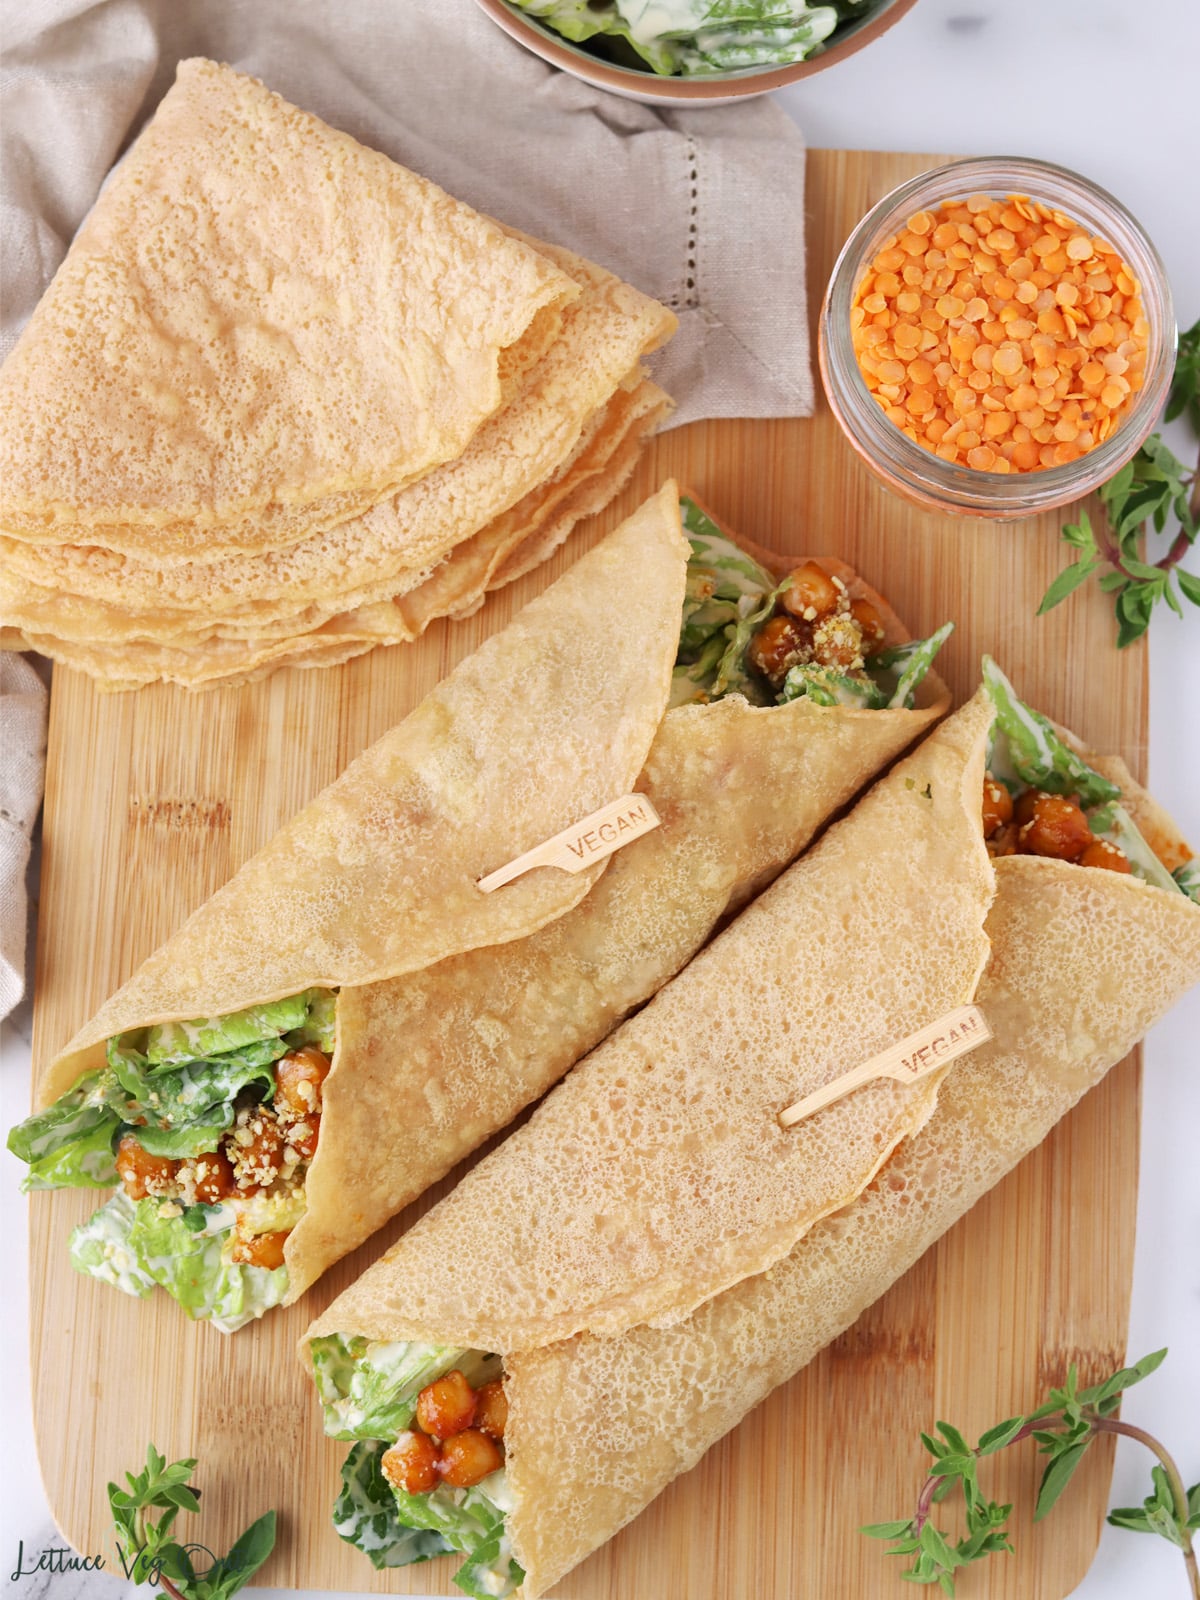 Two red lentil tortillas wrapped with salad on a wood board next to a folded stack of more lentil tortillas.